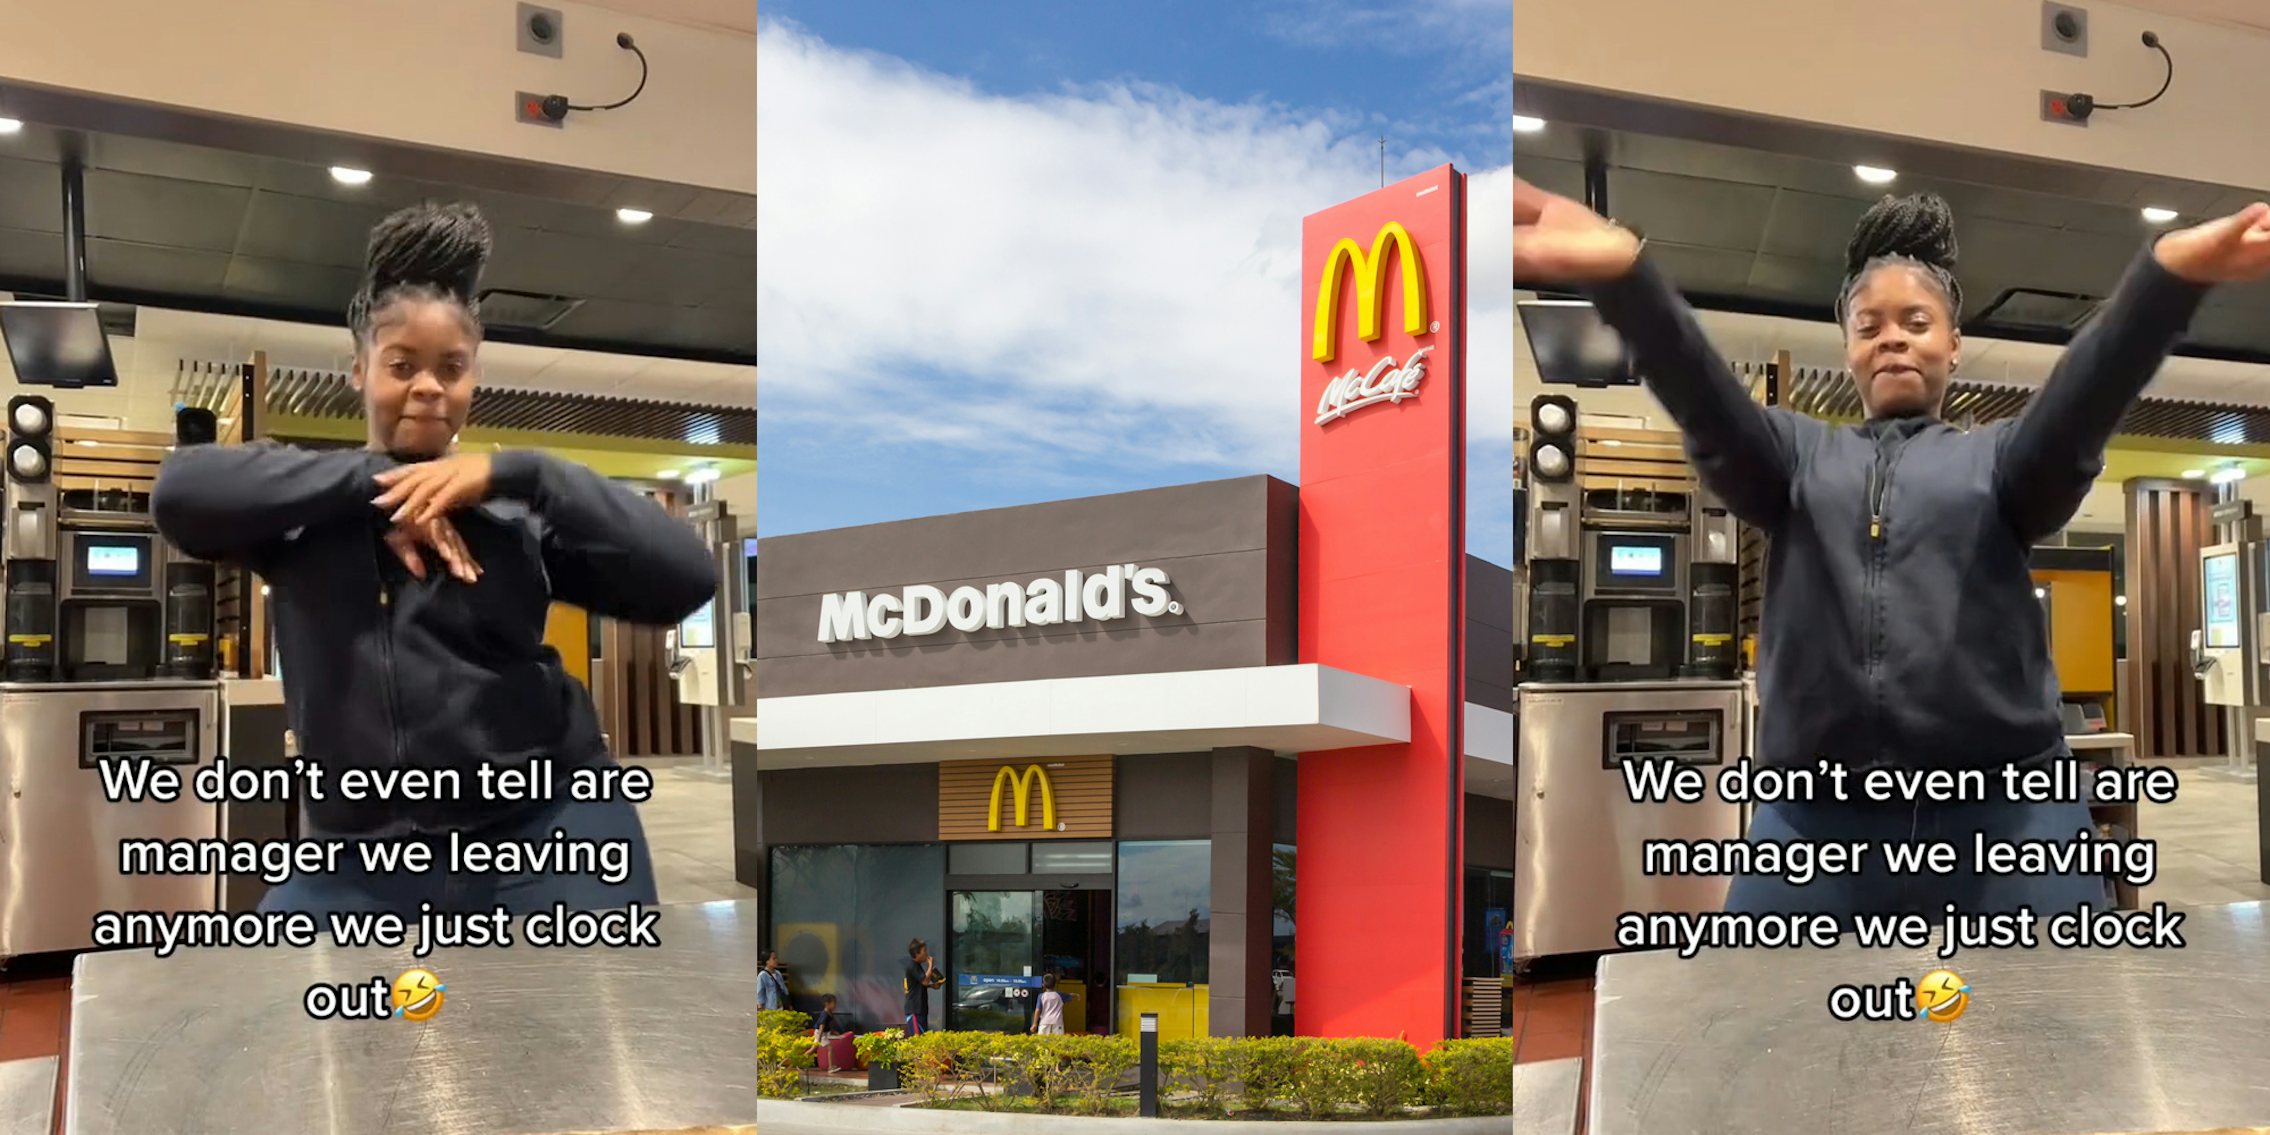 McDonald's employee dancing with caption 'We don't even tell our manager we leaving anymore we just clock out' (l) McDonald's building with signs and blue sky (c) McDonald's employee dancing with caption 'We don't even tell our manager we leaving anymore we just clock out' (r)